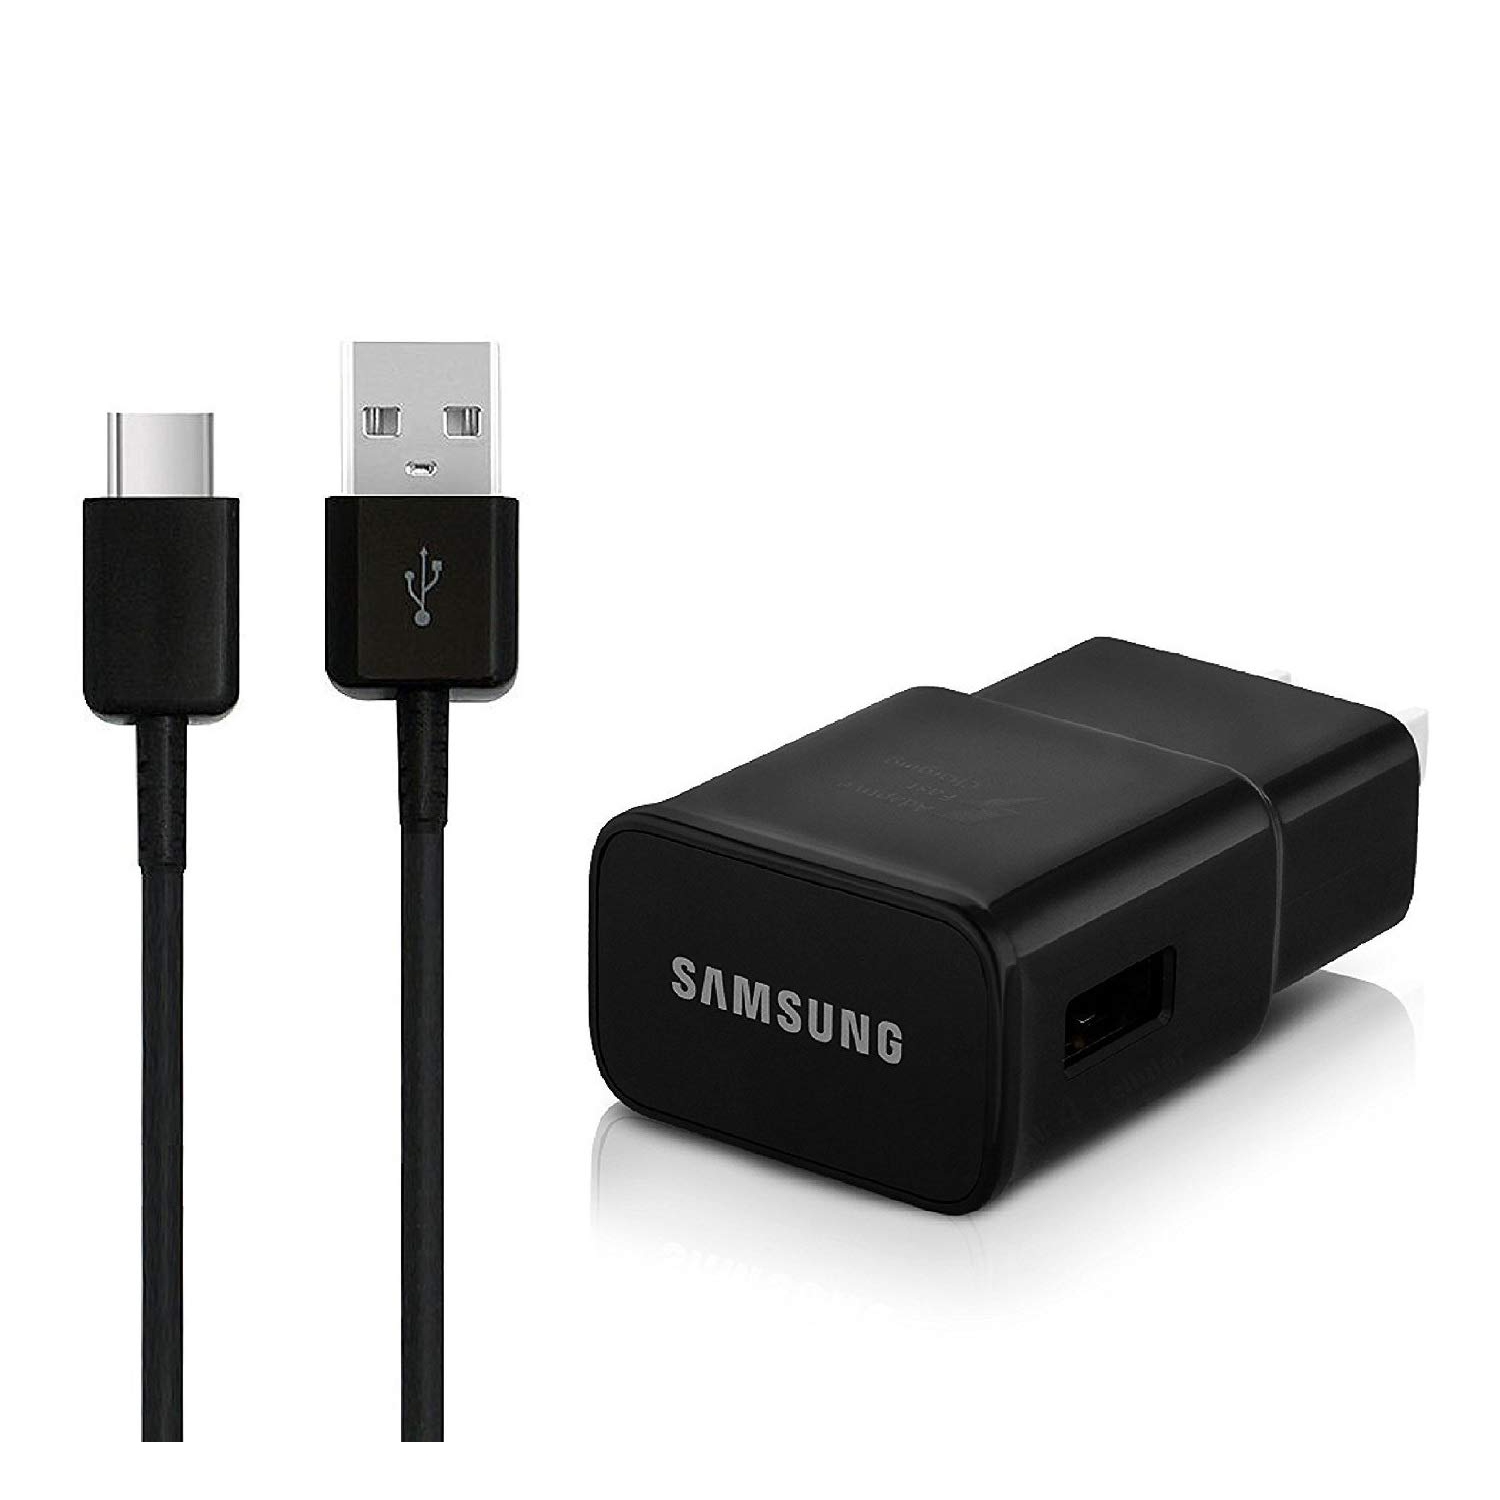 Samsung Fast Adaptive Charging Wall Charger EP-TA20JBE + 2 X Type USB C Cable EP-DG950CBE For Samsung Galaxy tab A 10.1 (2019)